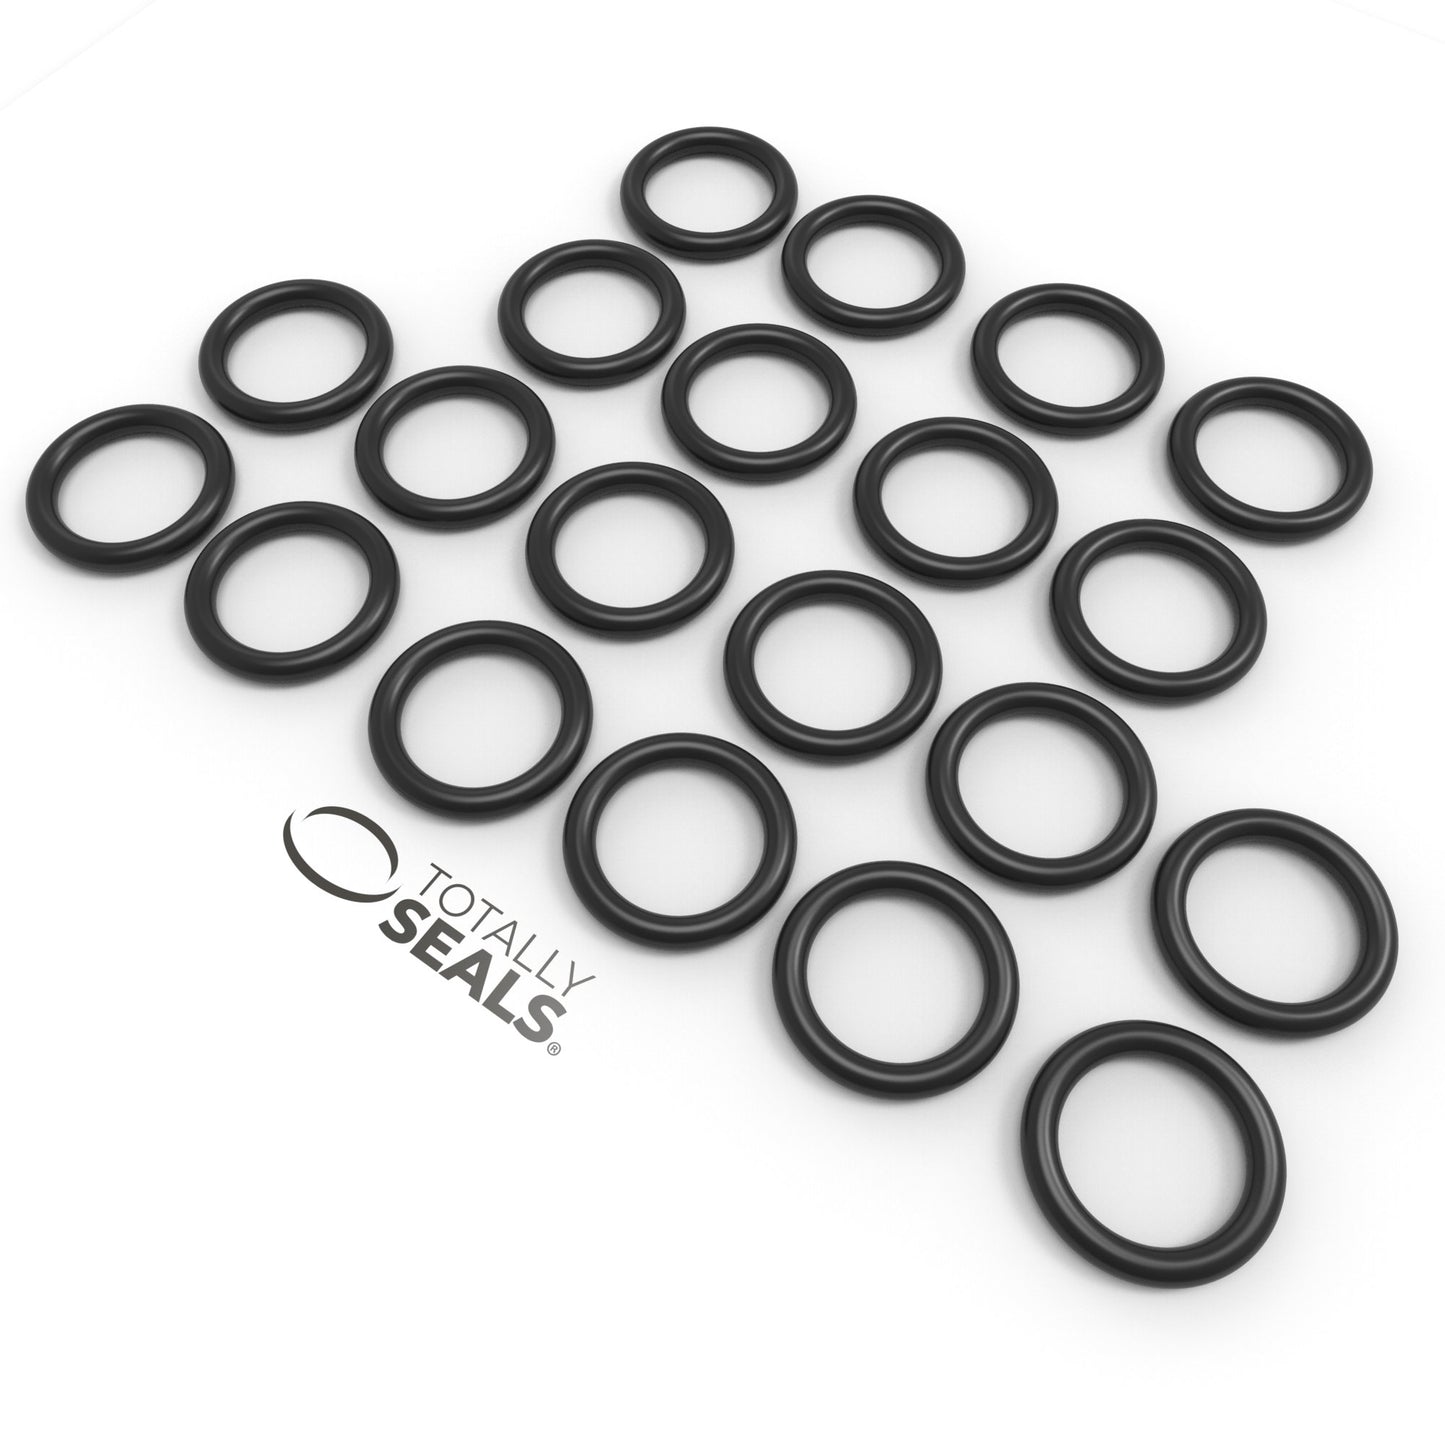 11/16" x 3/32" (BS115) Imperial Nitrile O-Rings - Totally Seals®